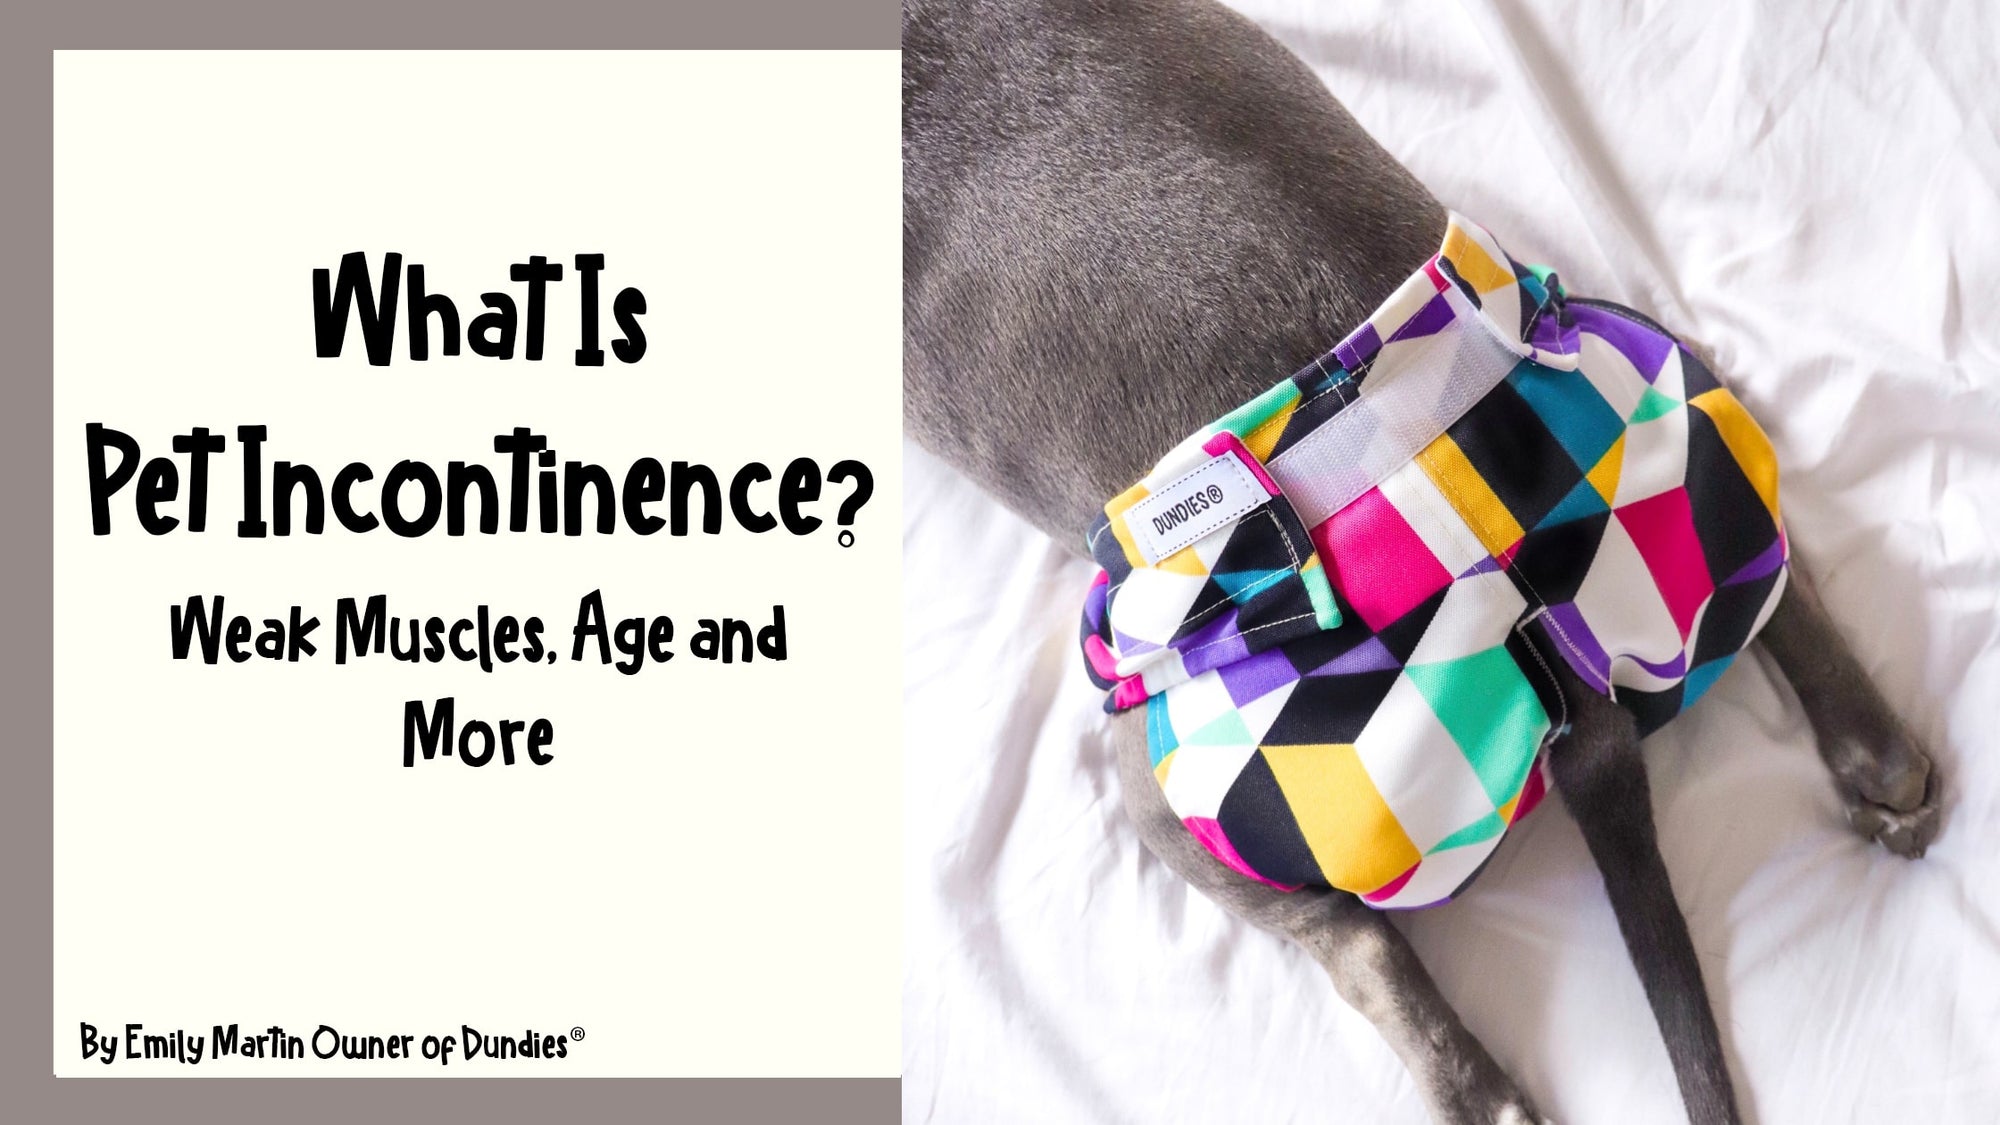 What is pet incontinence?